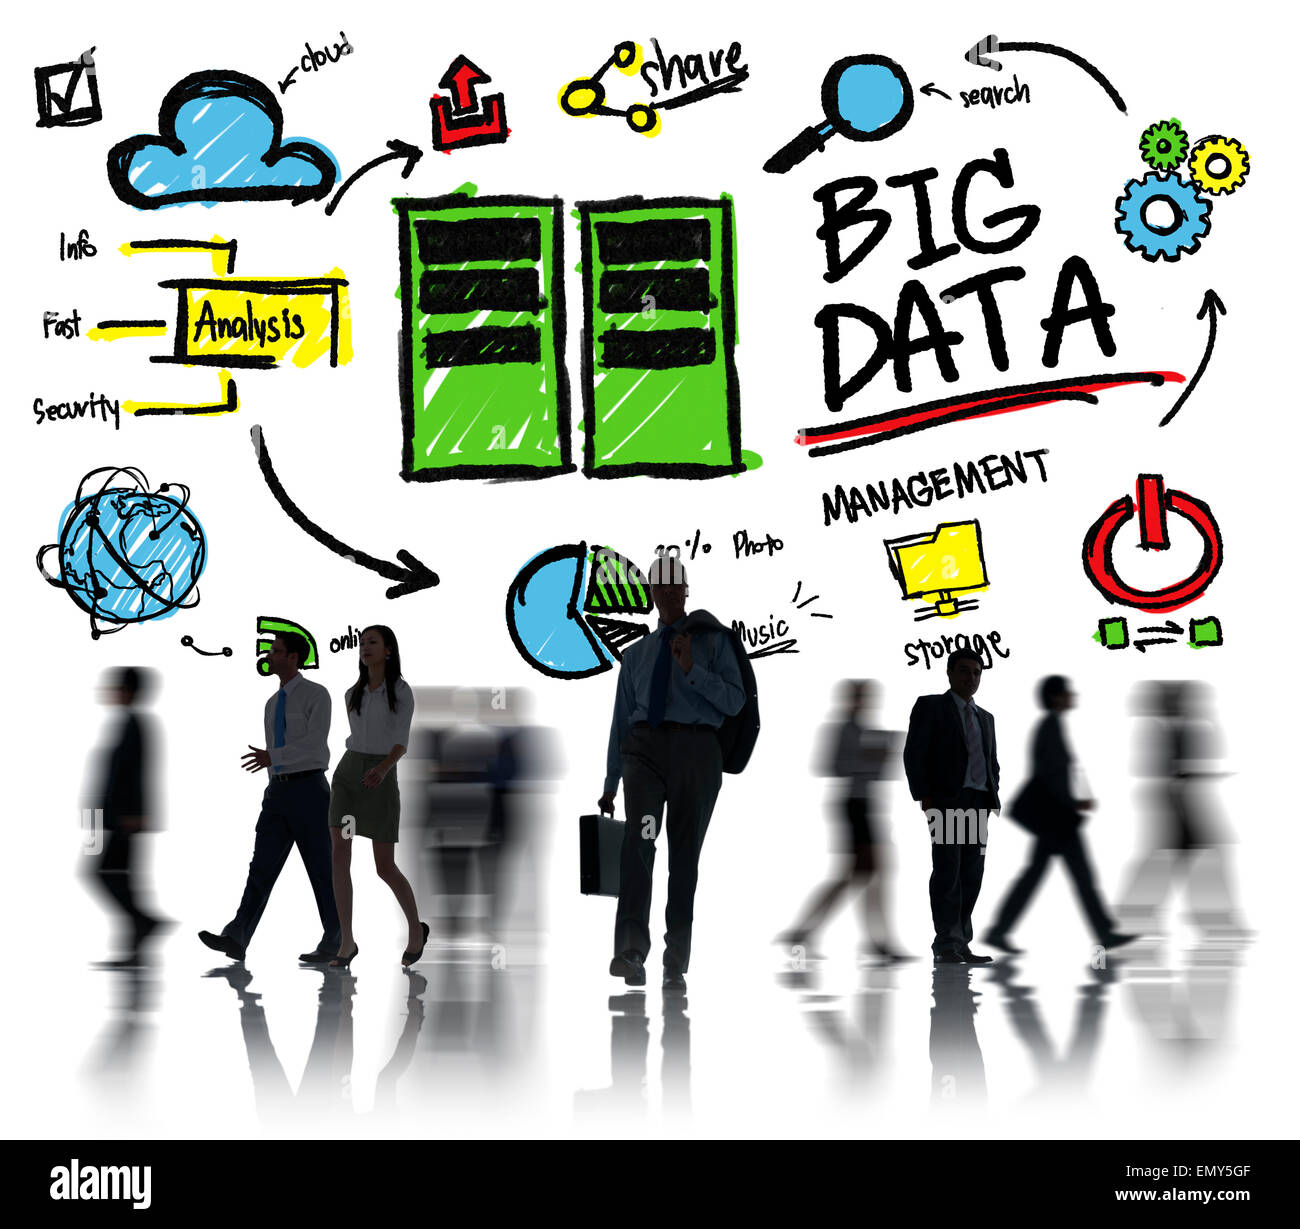 Business People Big Data Management Occupation Concept Stock Photo